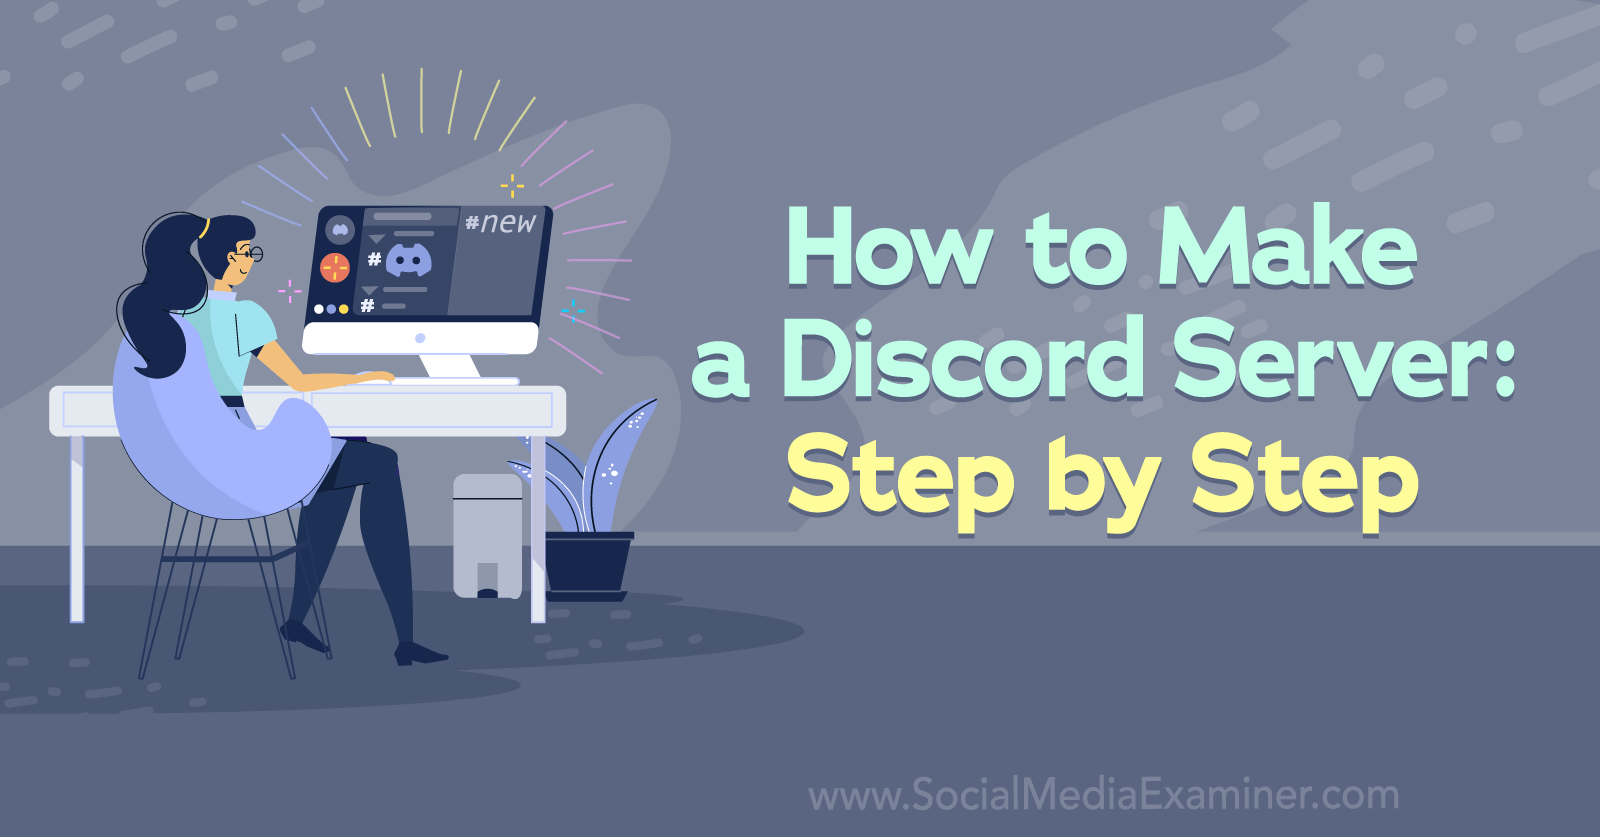 How to Make a Discord Server: Step by Step by Corinna Keefe on Social Media Examiner.